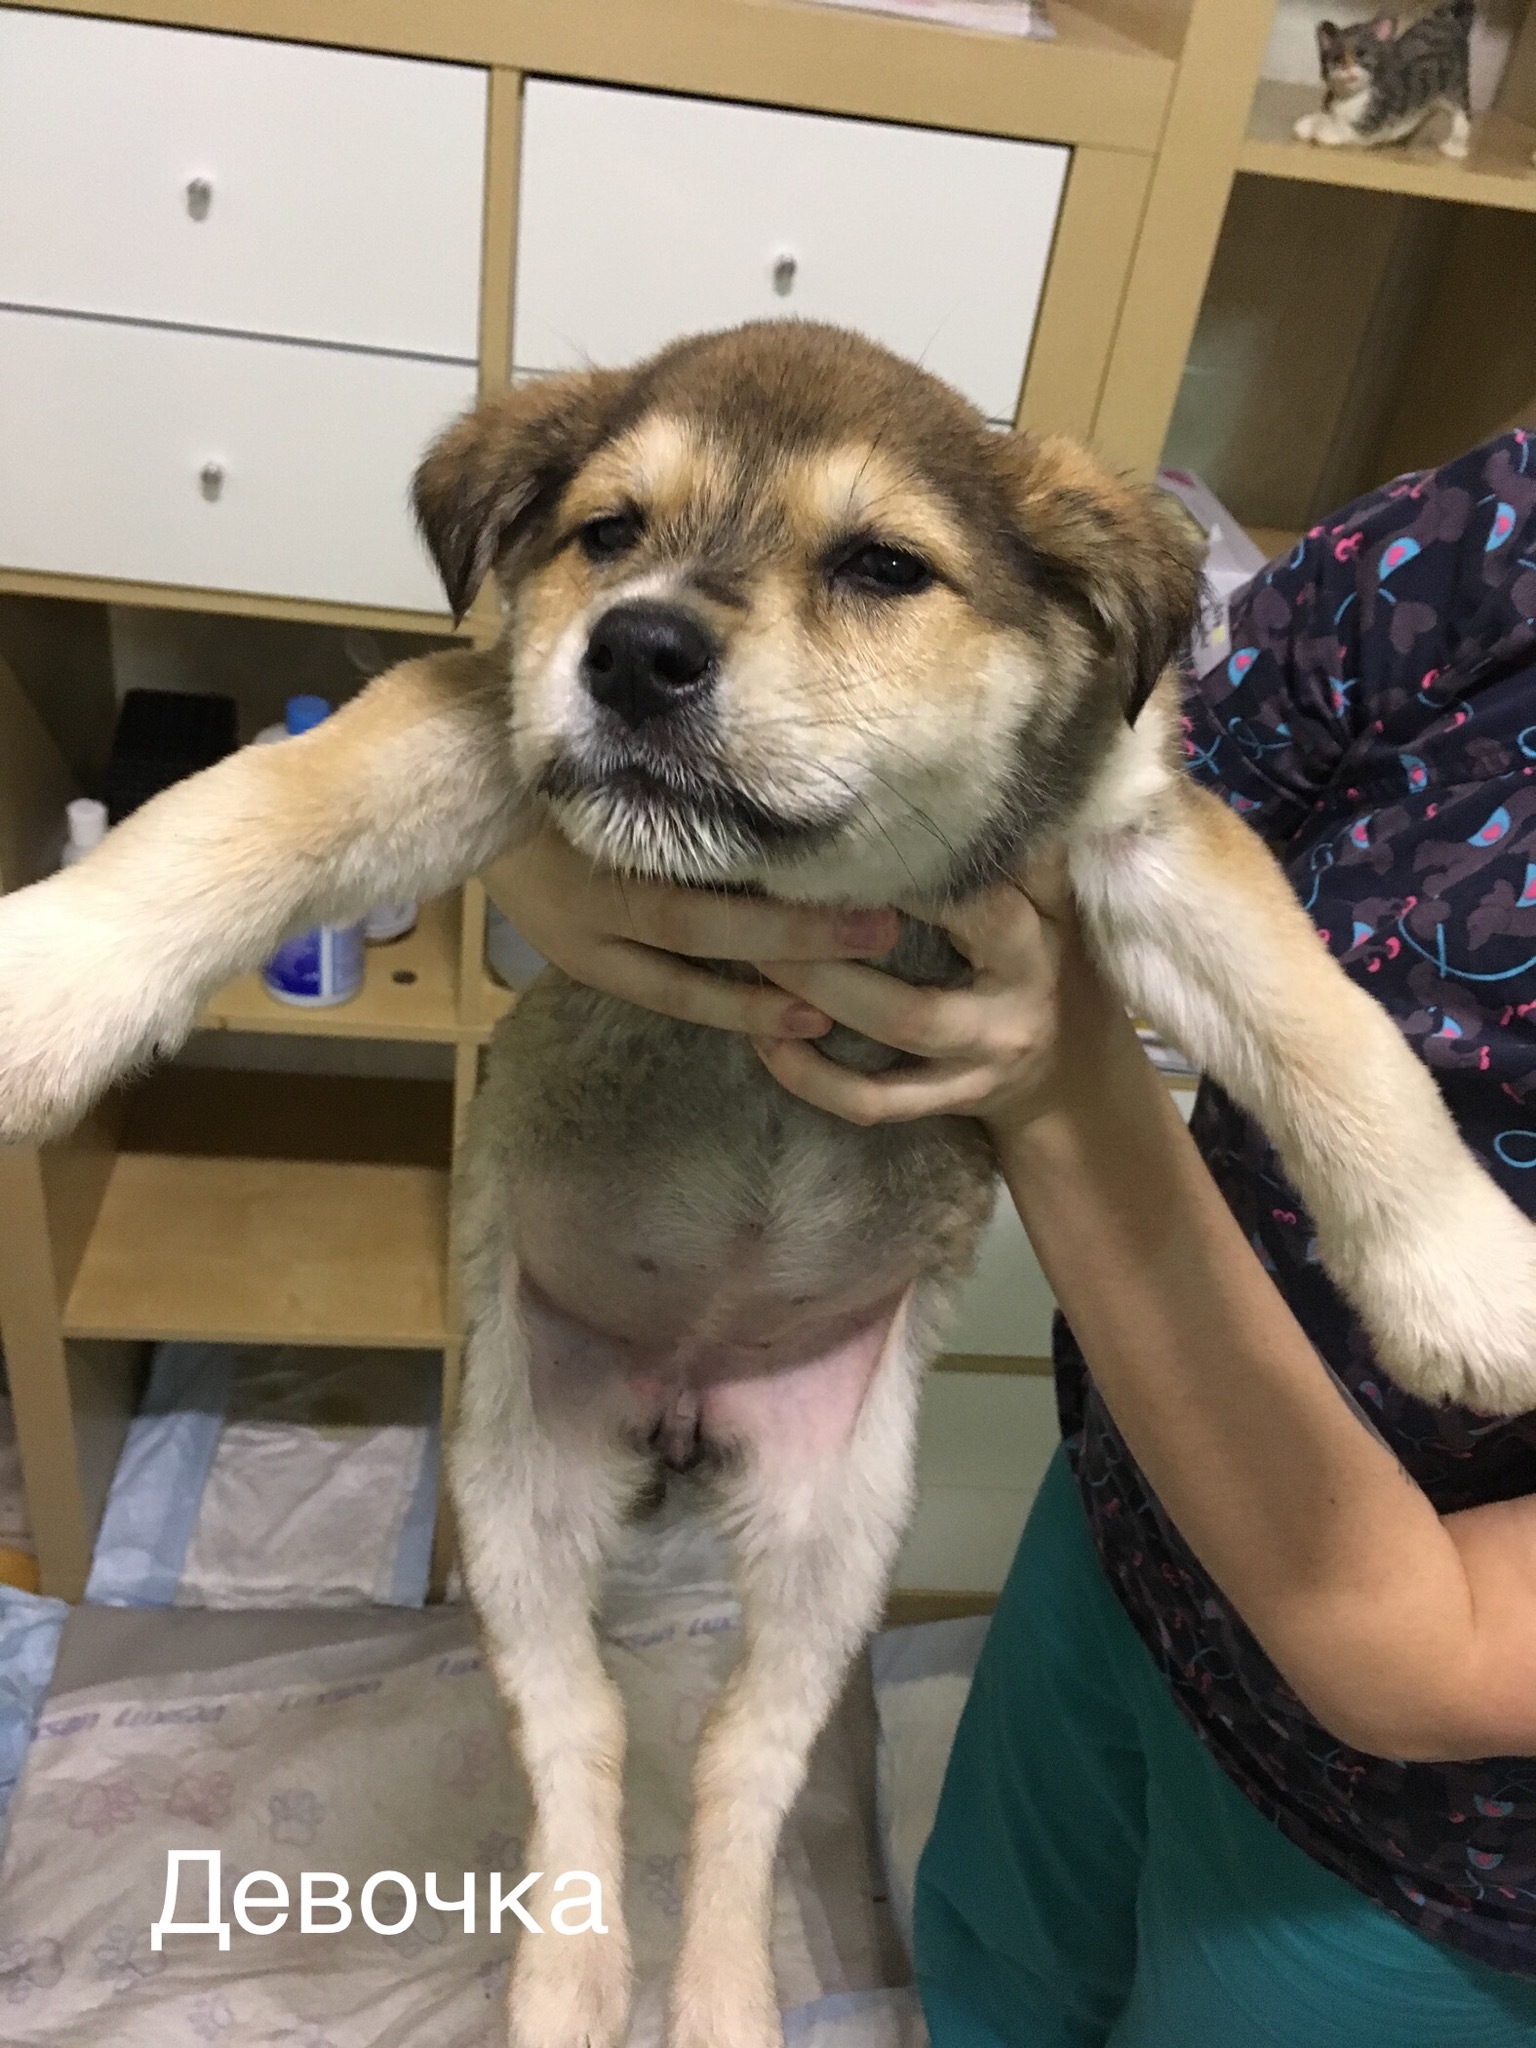 Help find a home! - Puppies, In good hands, Moscow, House, Foundling, Vet, Help, Dog, Longpost